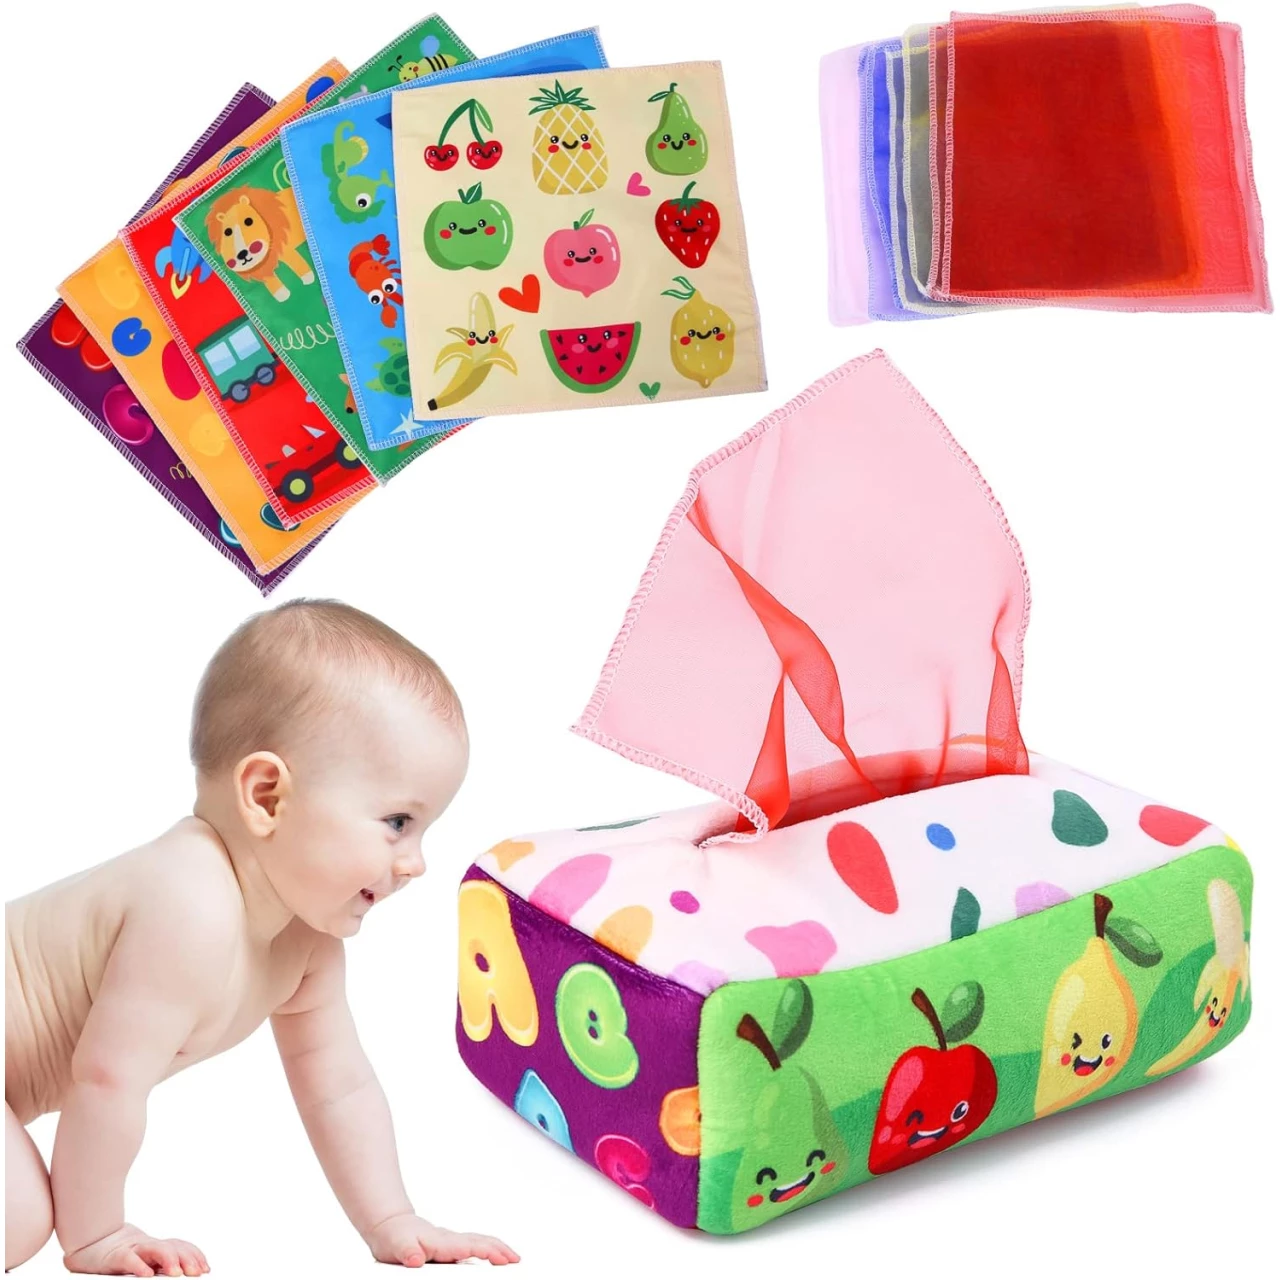 YOGINGO Baby Toys 6 to 12 Months - Tissue Box Toy Montessori for Babies 6-12 Months, Soft Stuffed High Contrast Crinkle Infant Sensory Toys, Boys&amp;Girls Kids Early Learning Gifts